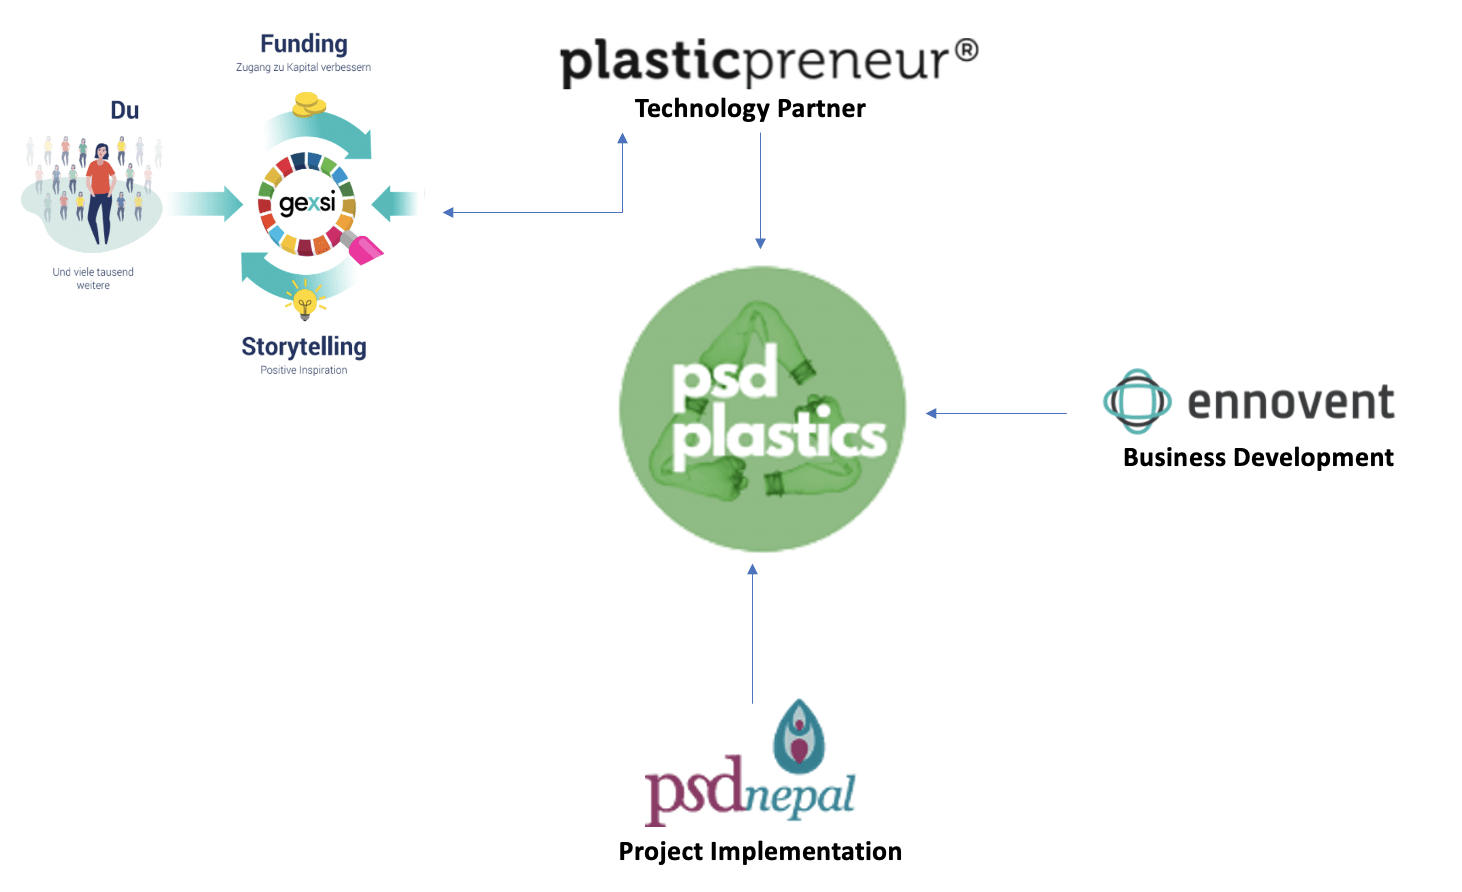 Image shows the logo of PSD Plastics in the centre with lines coming from 4 directions indicating, PSD Nepal, plasticpreneur, Ennovent and Gexsi